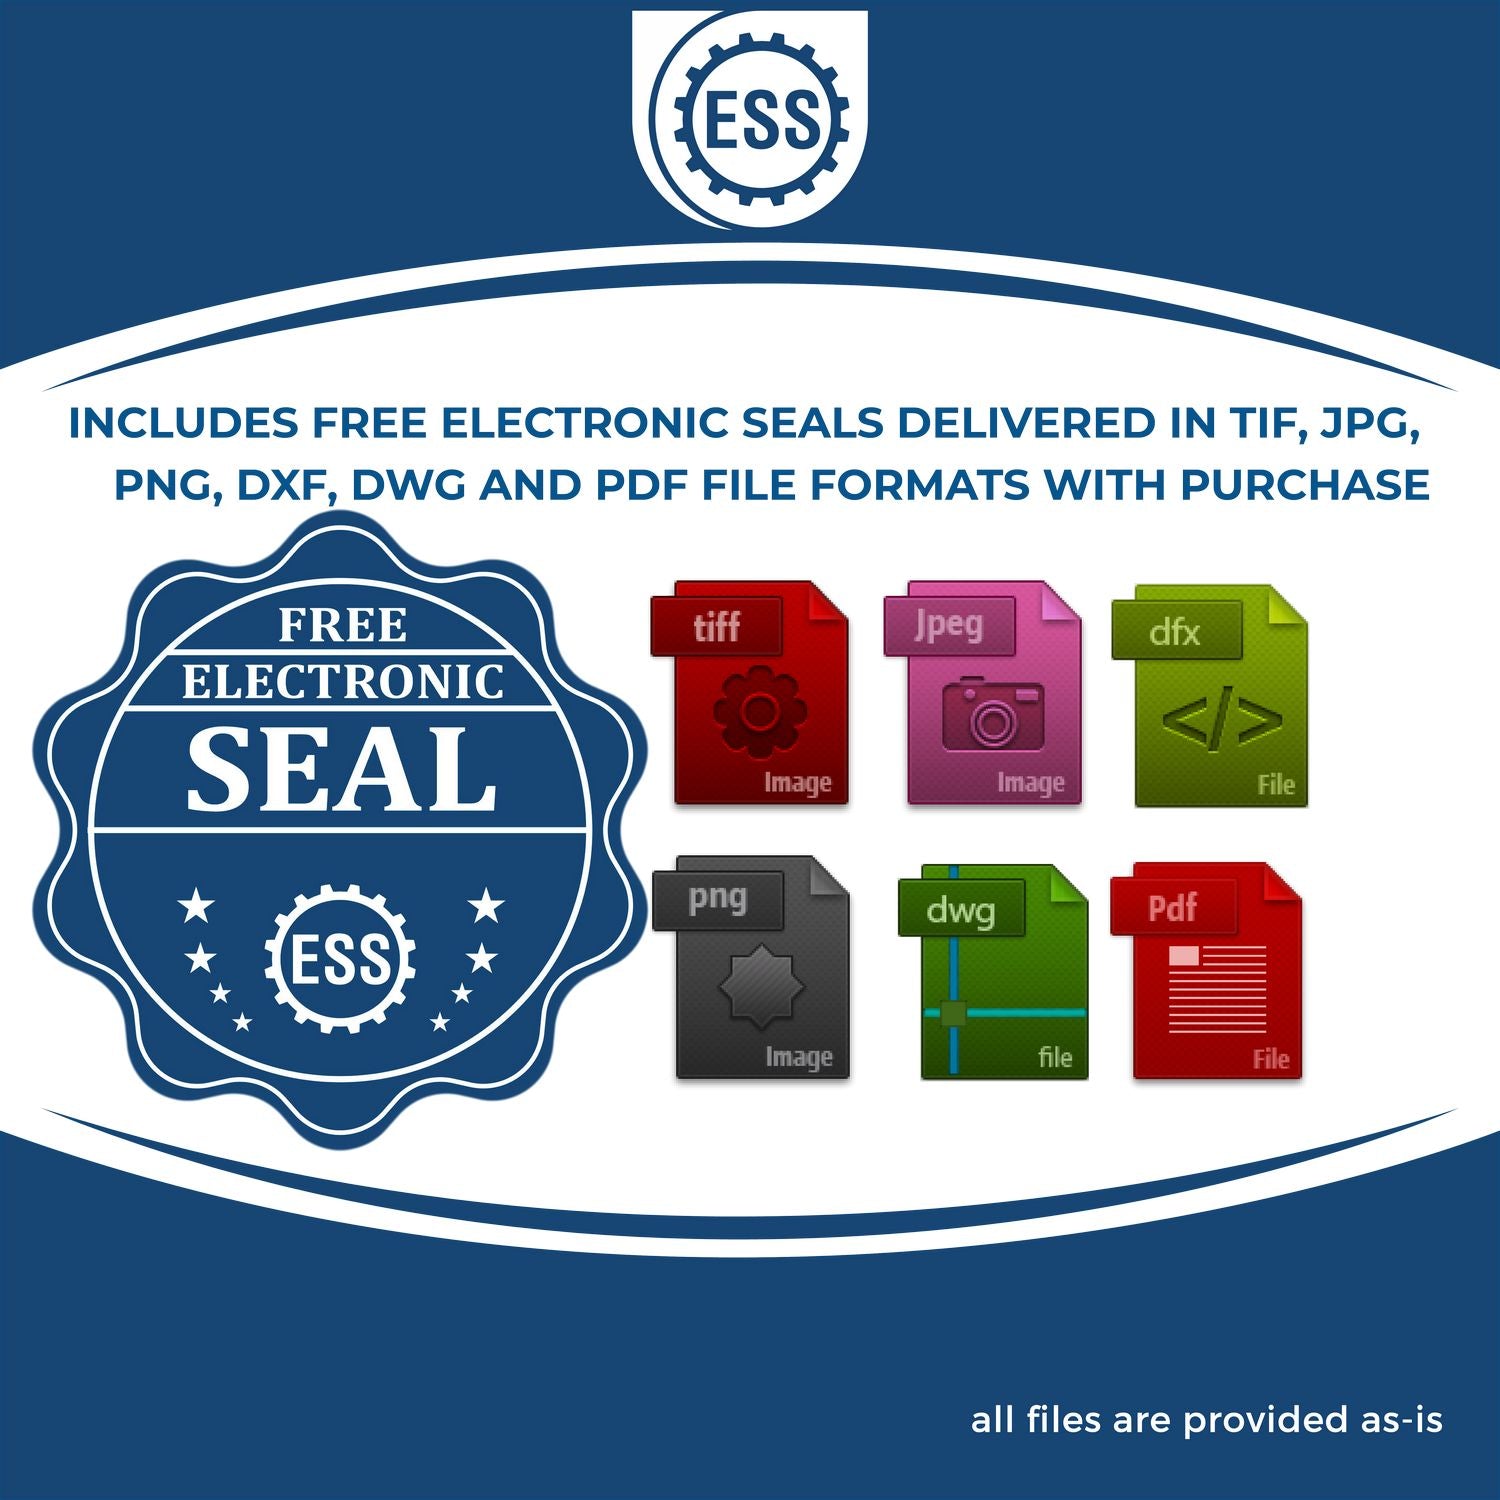 An infographic for the free electronic seal for the State of Wisconsin Extended Long Reach Engineer Seal illustrating the different file type icons such as DXF, DWG, TIF, JPG and PNG.